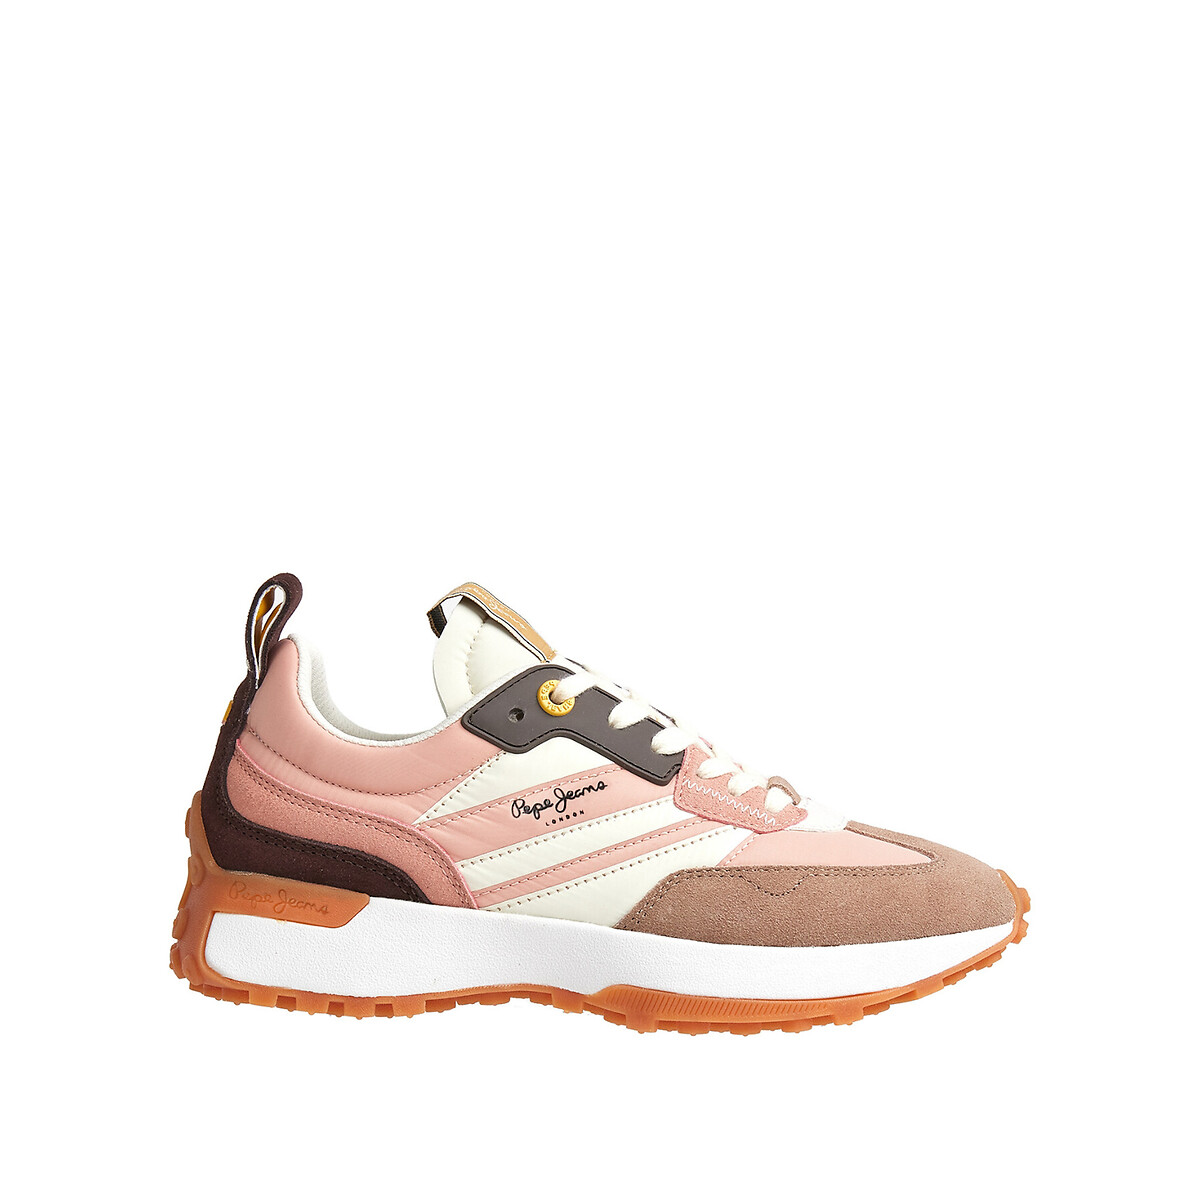 Lucky grand trainers, pink/beige, Pepe Jeans | La Redoute